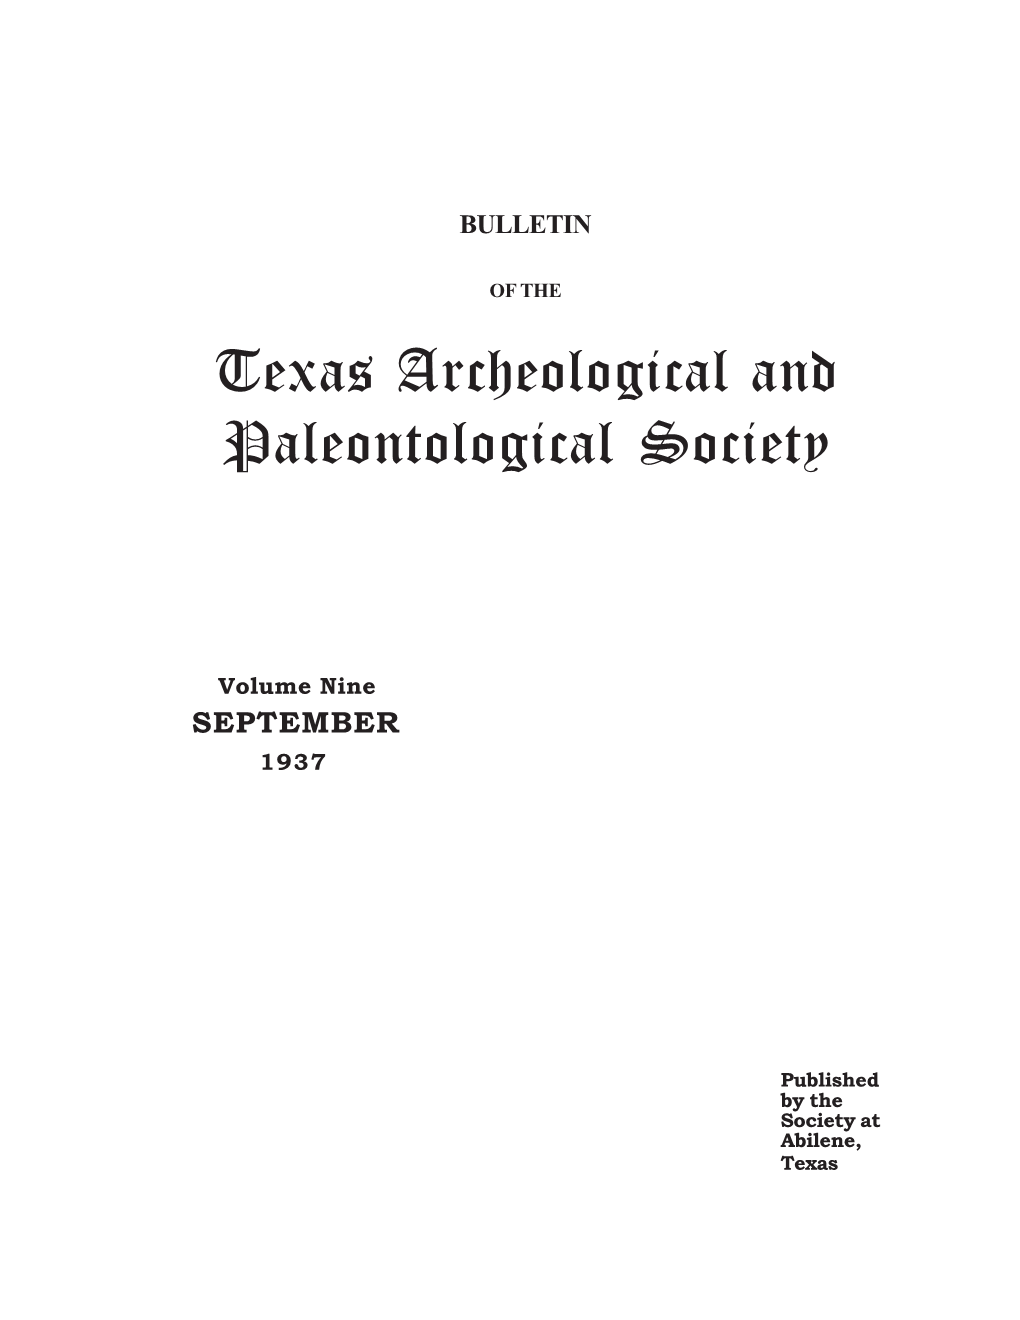 Texas Archeological and Paleontological Society